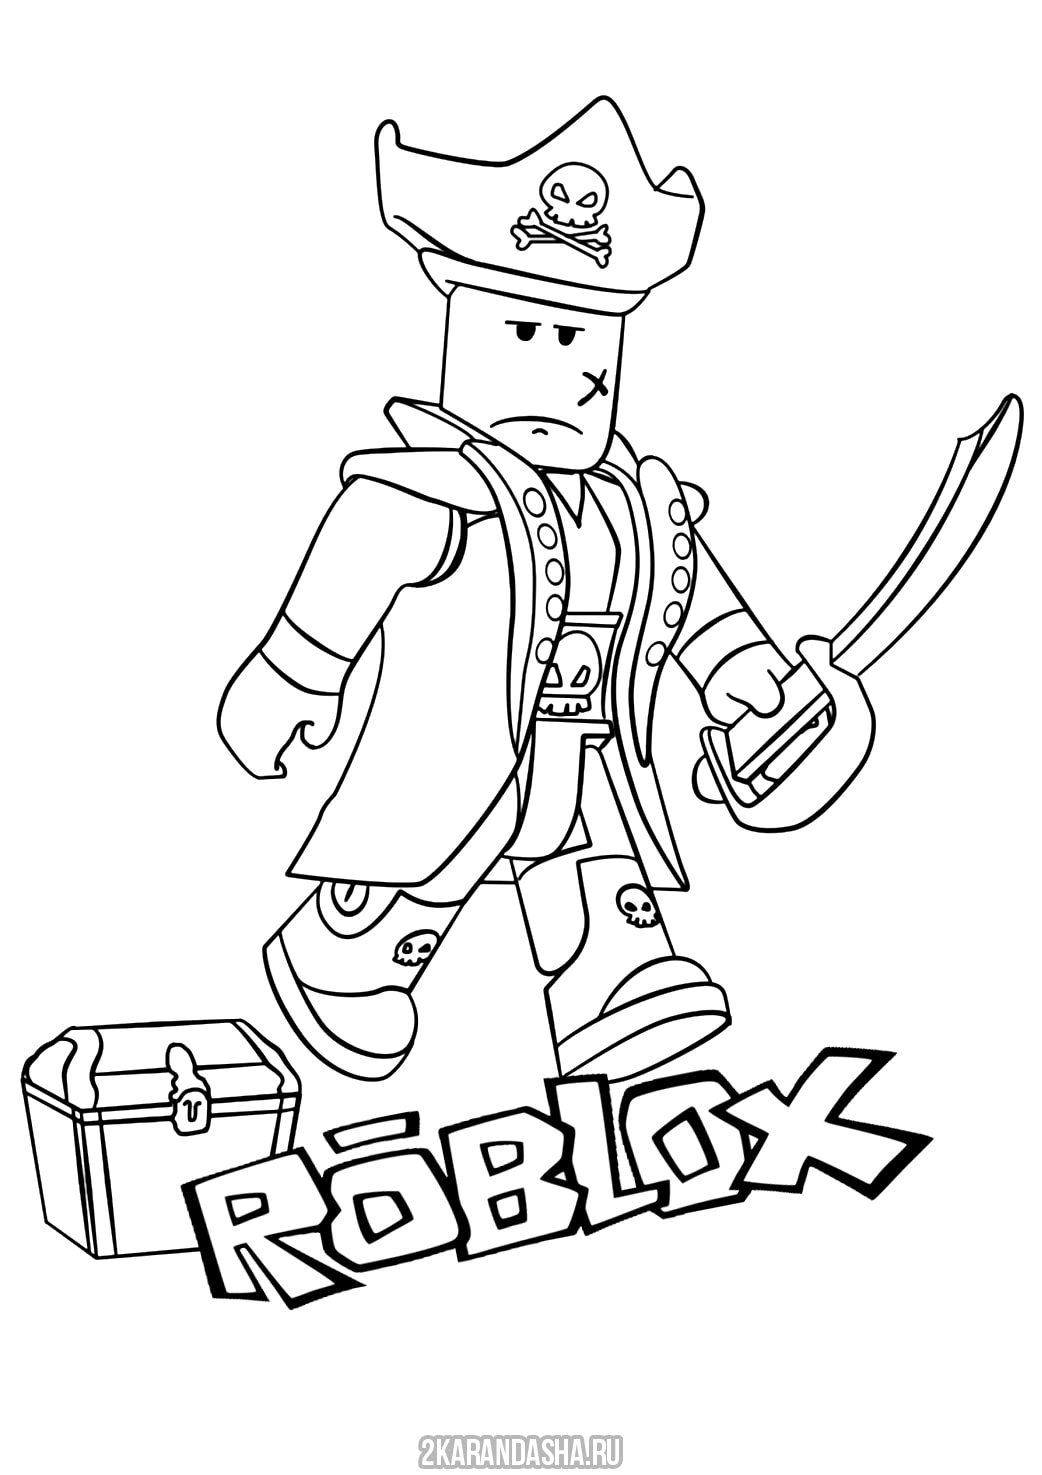 Coloring Page Roblox Pirate Print Roblox - roblox guest coloring pages